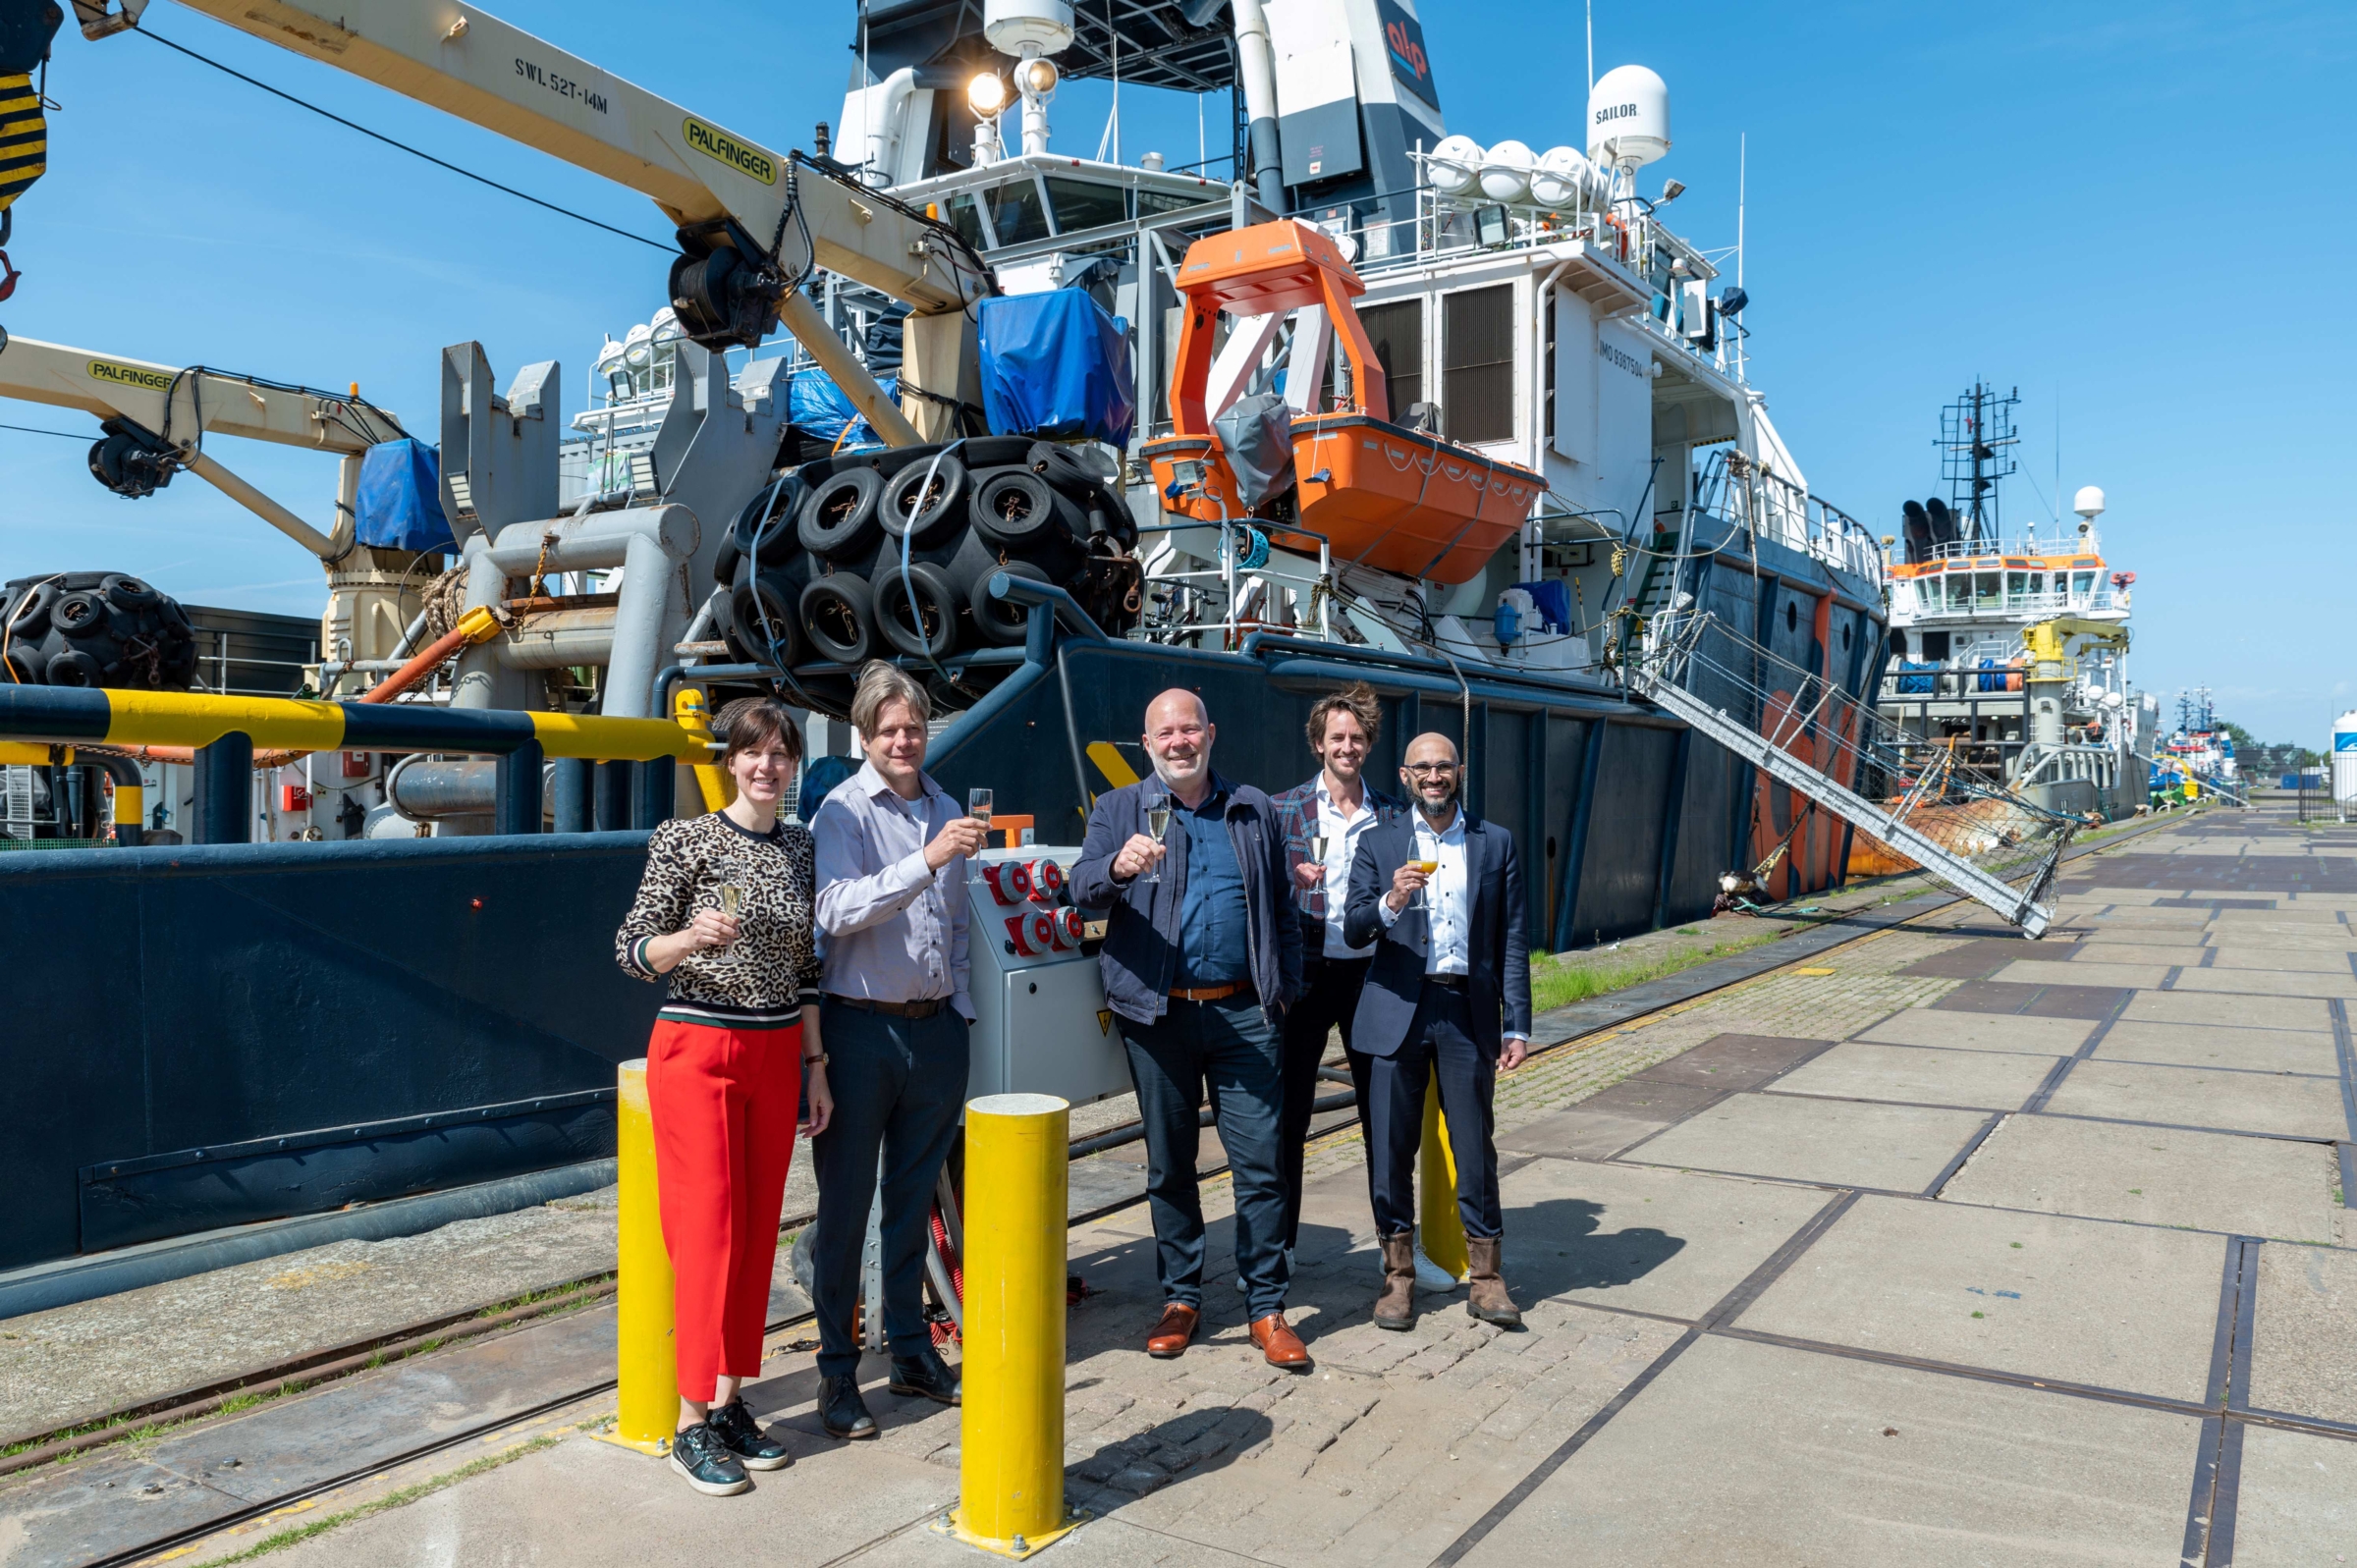 Deputy mayor Robert Simons of Rotterdam opening Royal Roos shore power connection for seagoing vessels at Merwehaven, Rotterdam